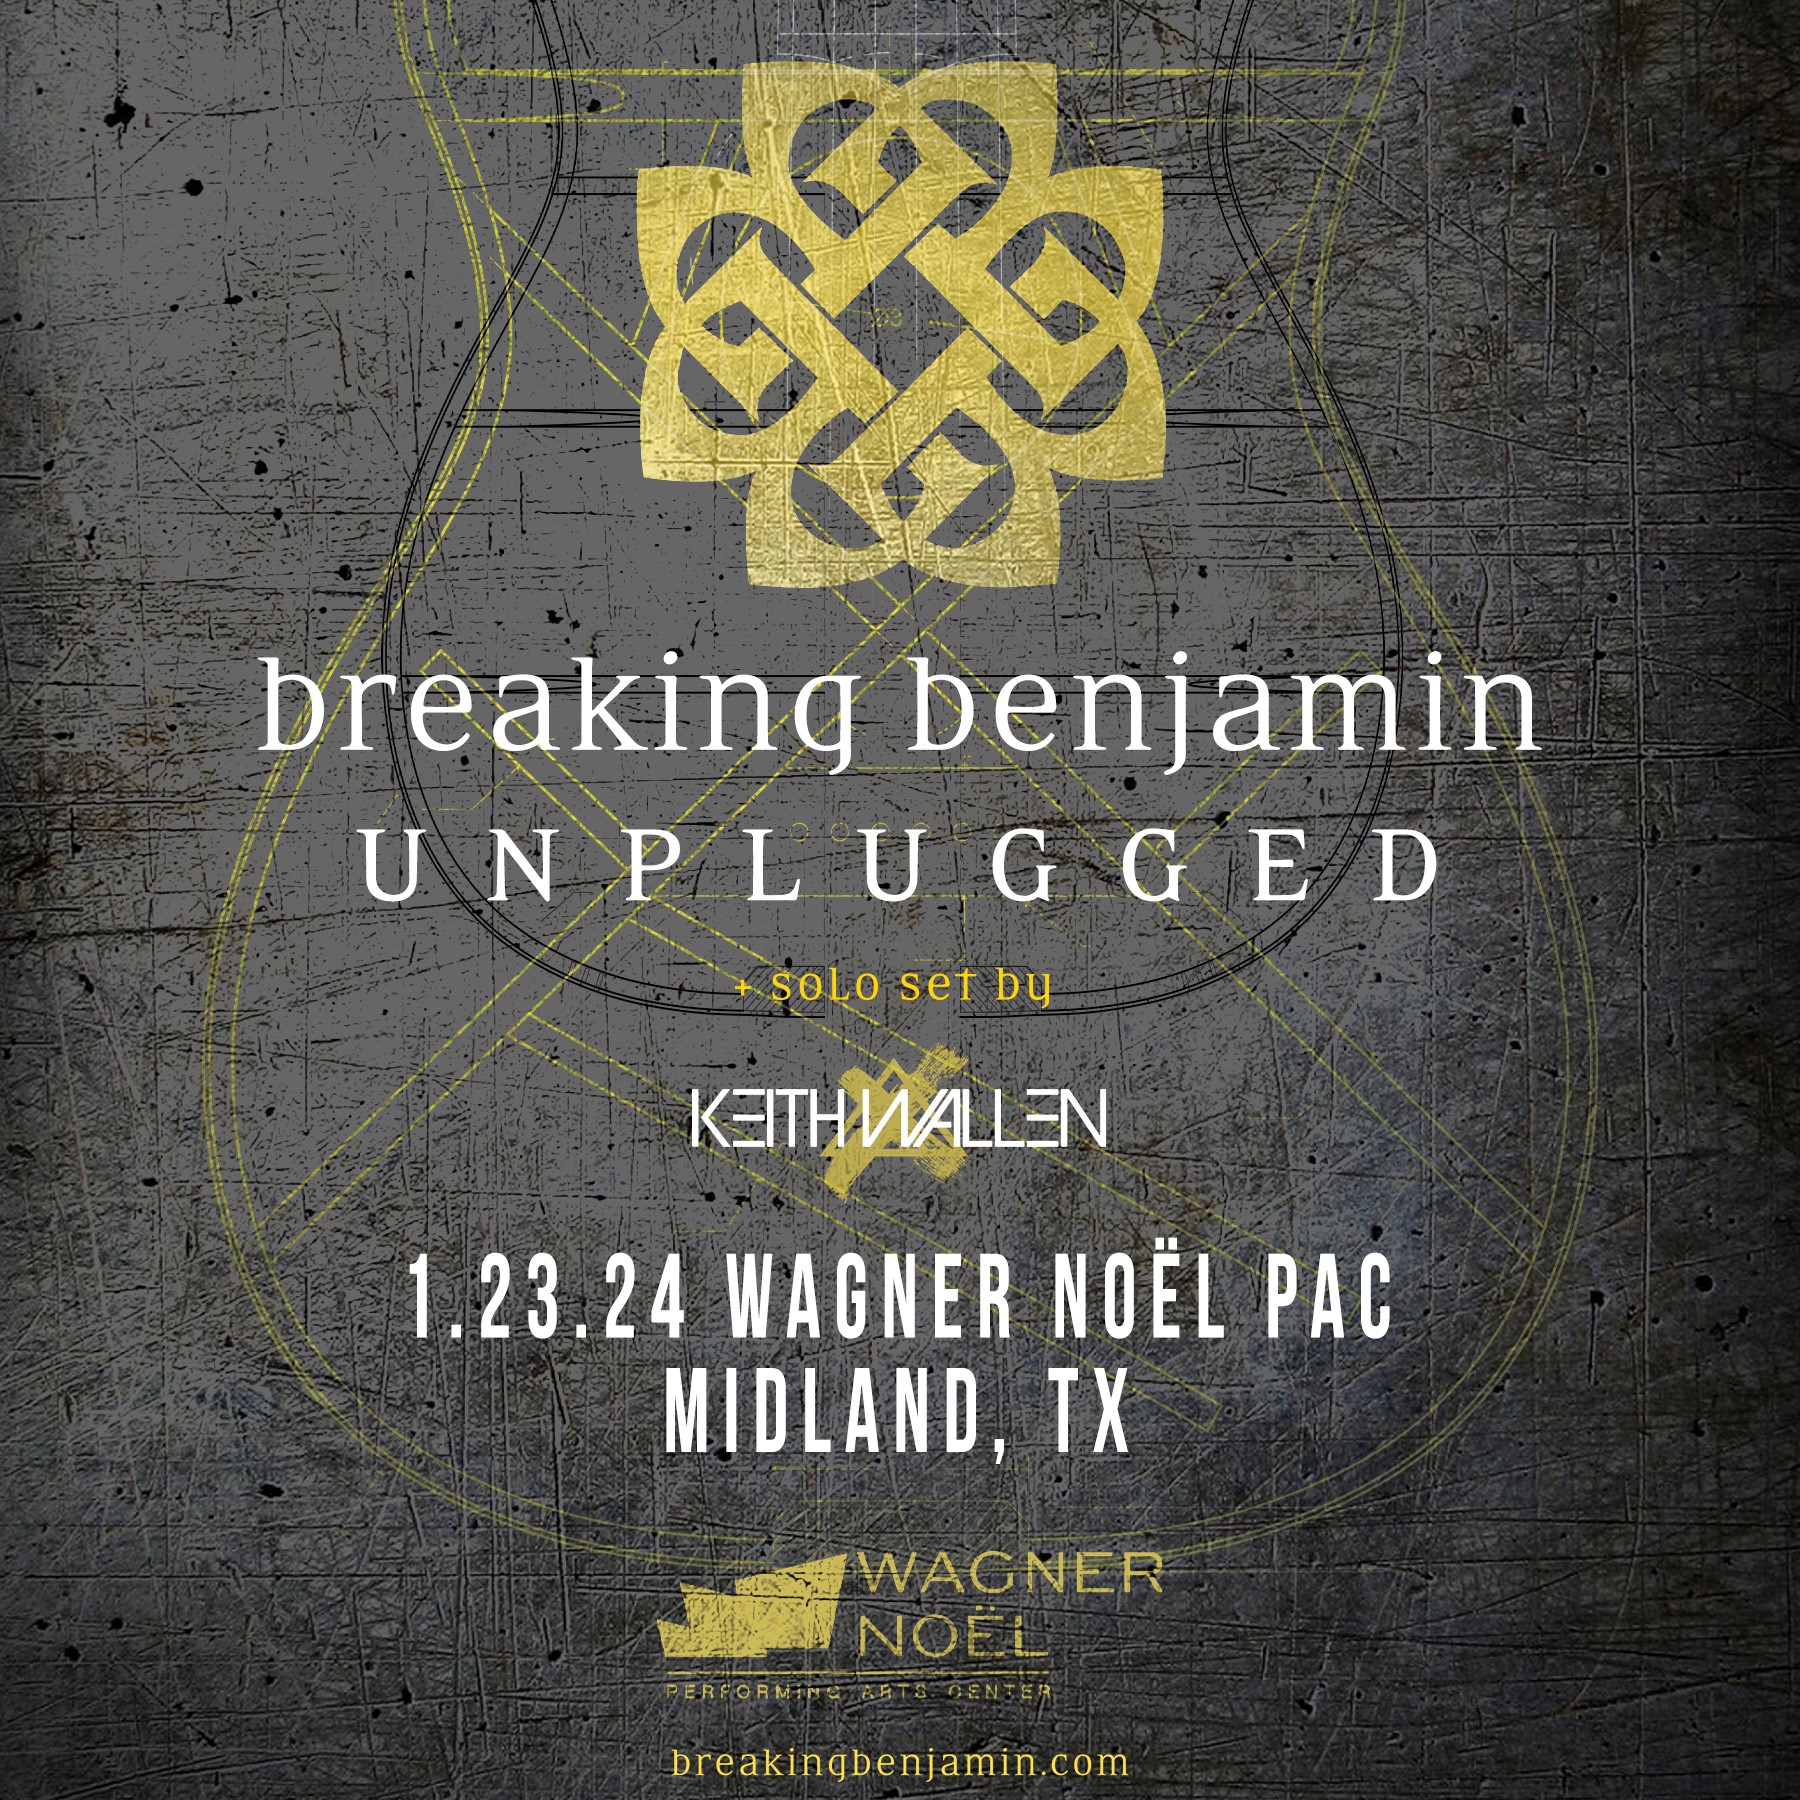 More Info for Breaking Benjamin: Unplugged is Coming to Wagner Noël PAC